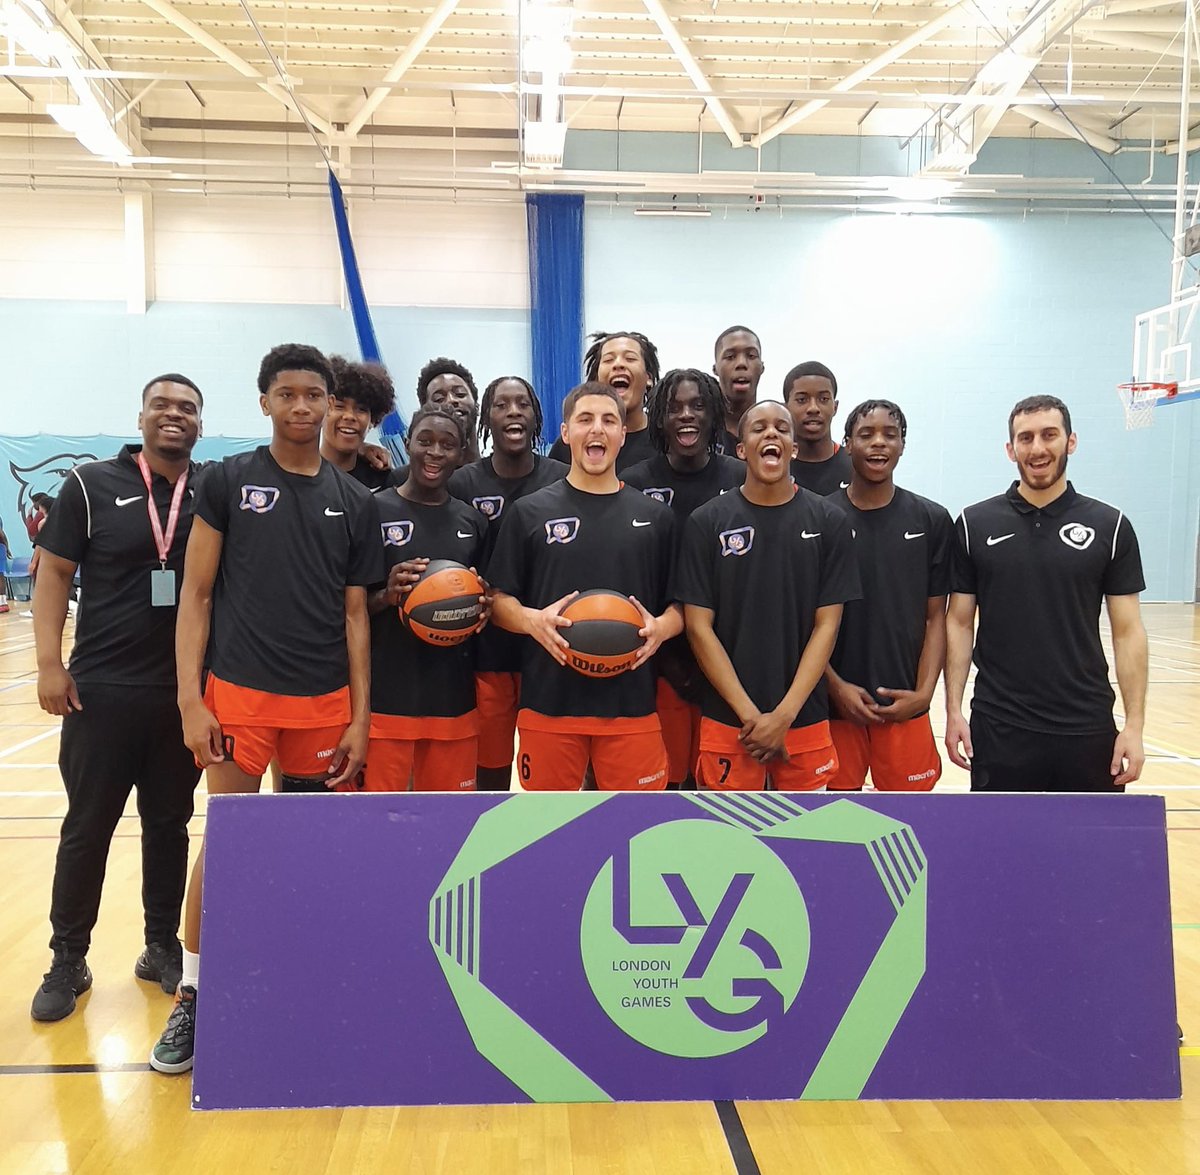 London Youth Games Final Fours spot secured. Great job yesterday boys let’s keep it up! #teamharingey #ldnyouthgames